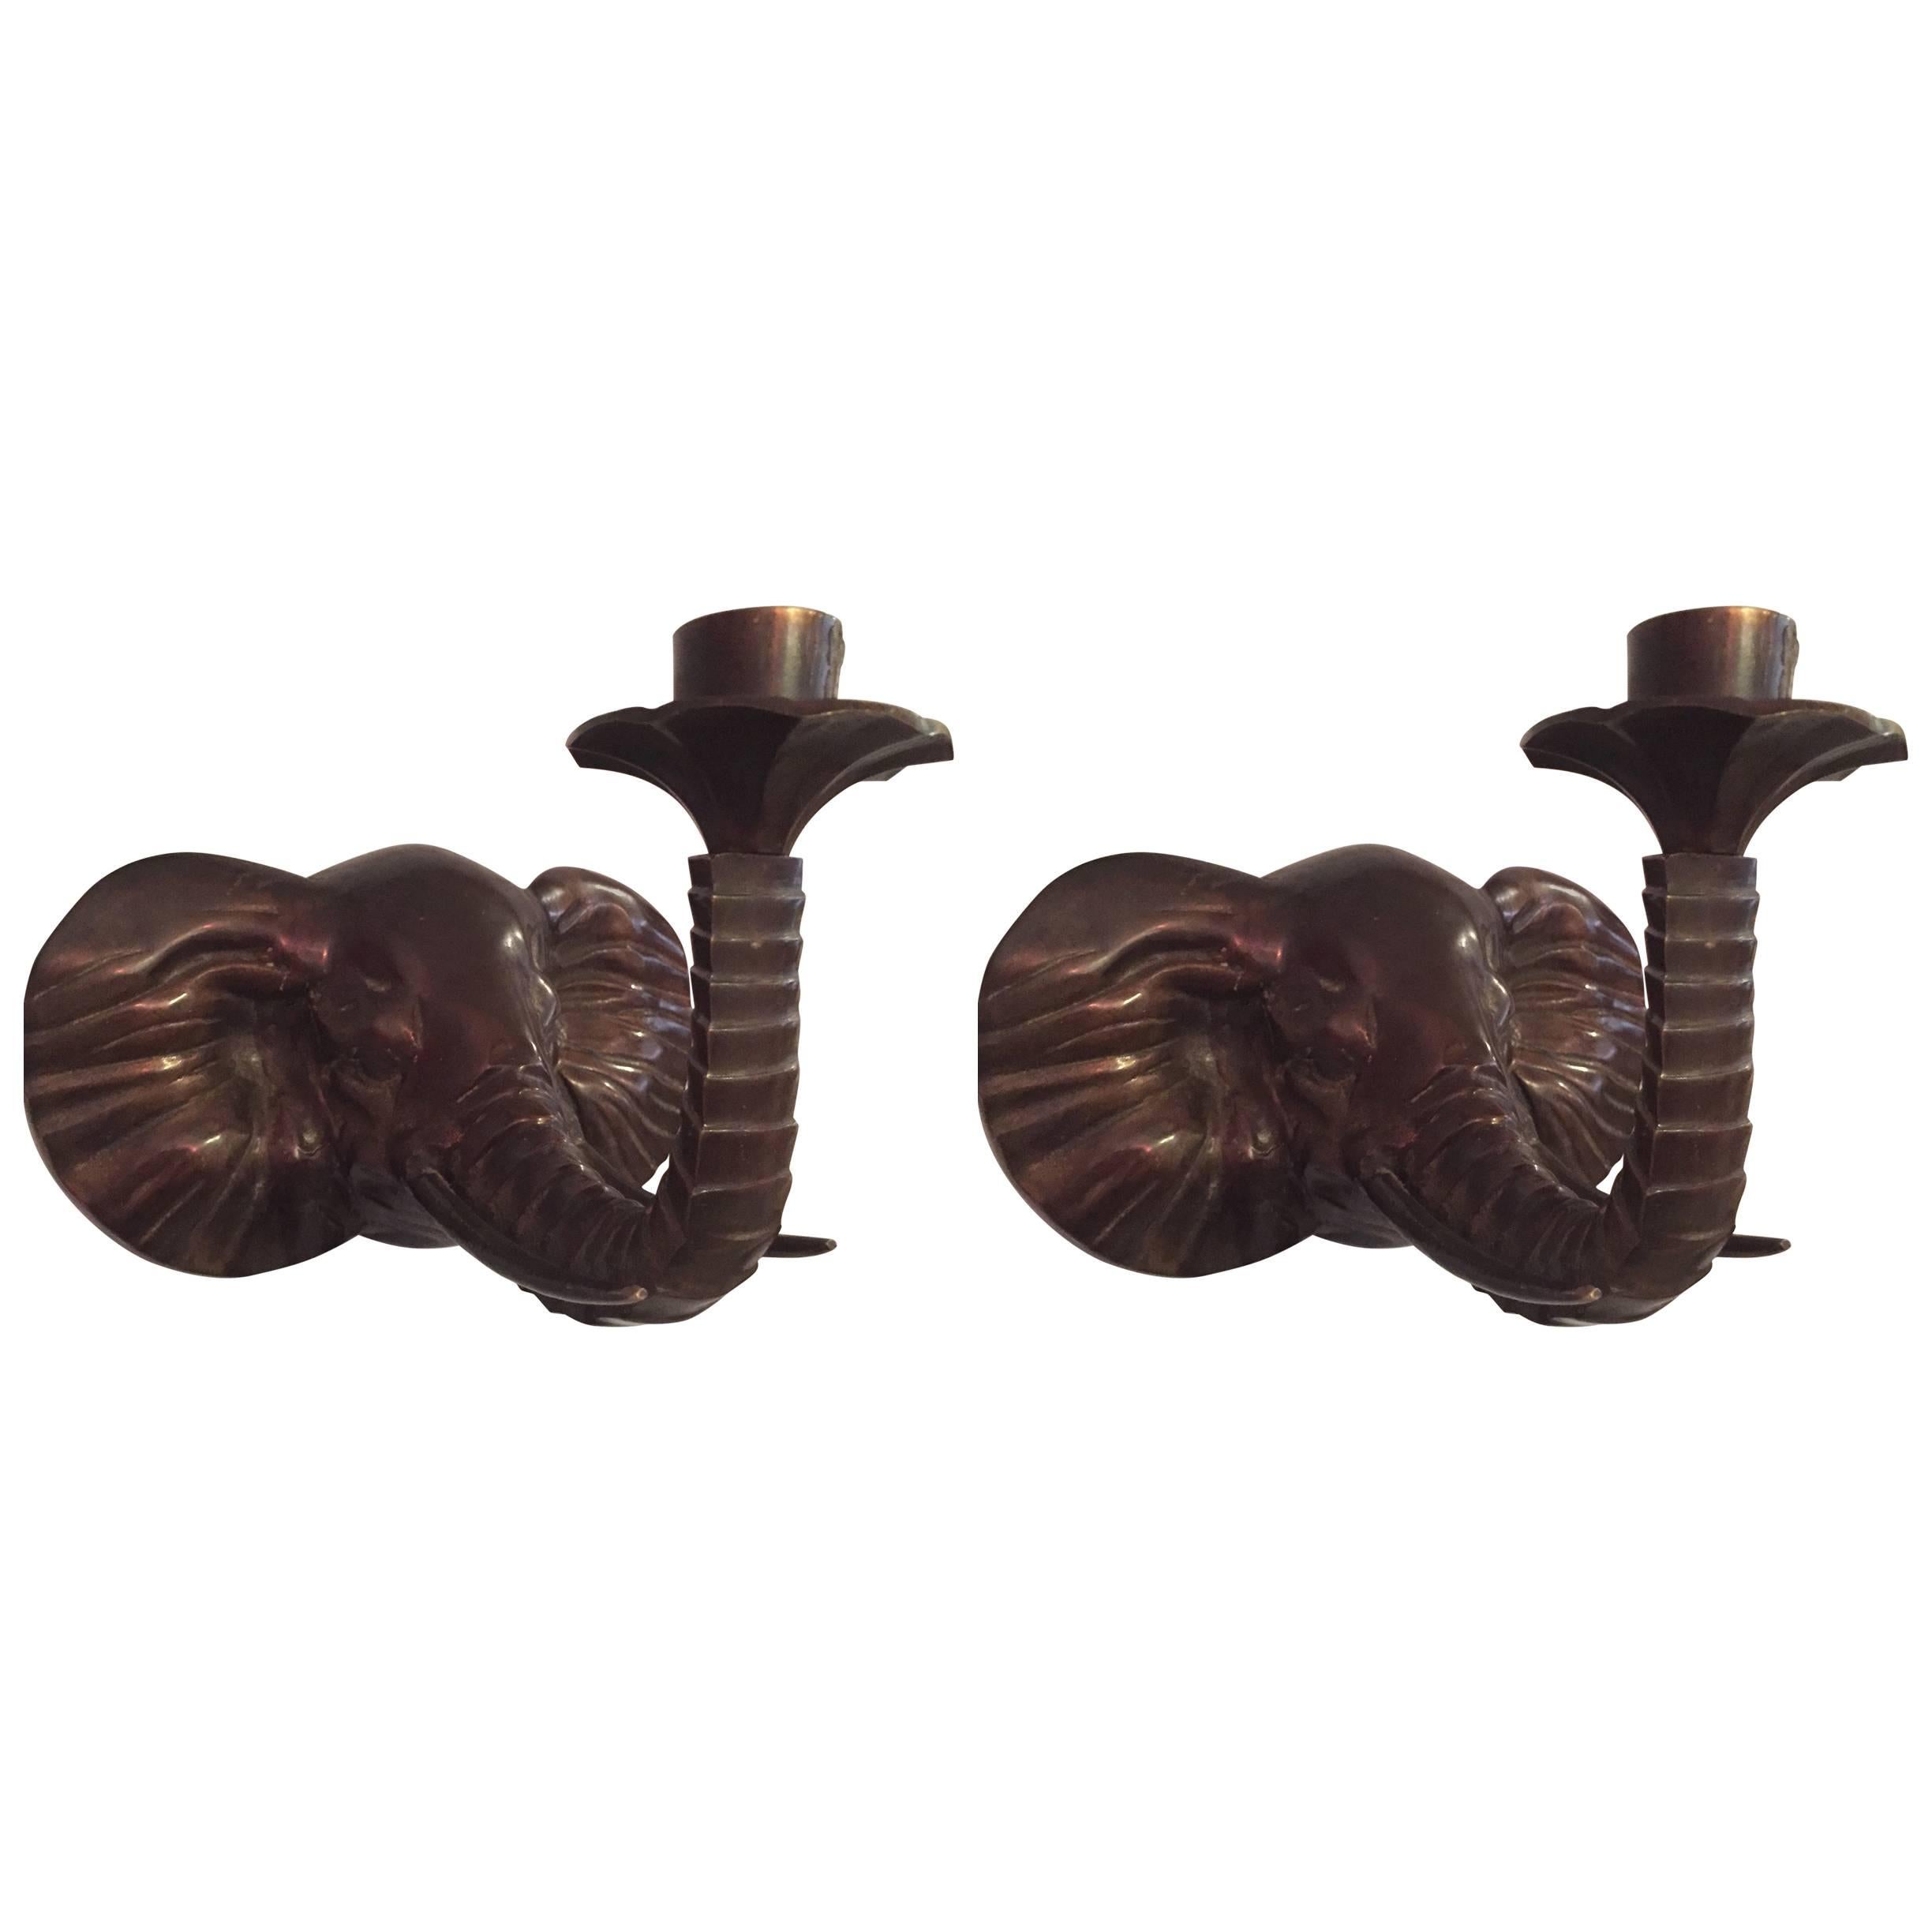 Pair of French Bronze Elephant Wall-Mounted Candlesticks